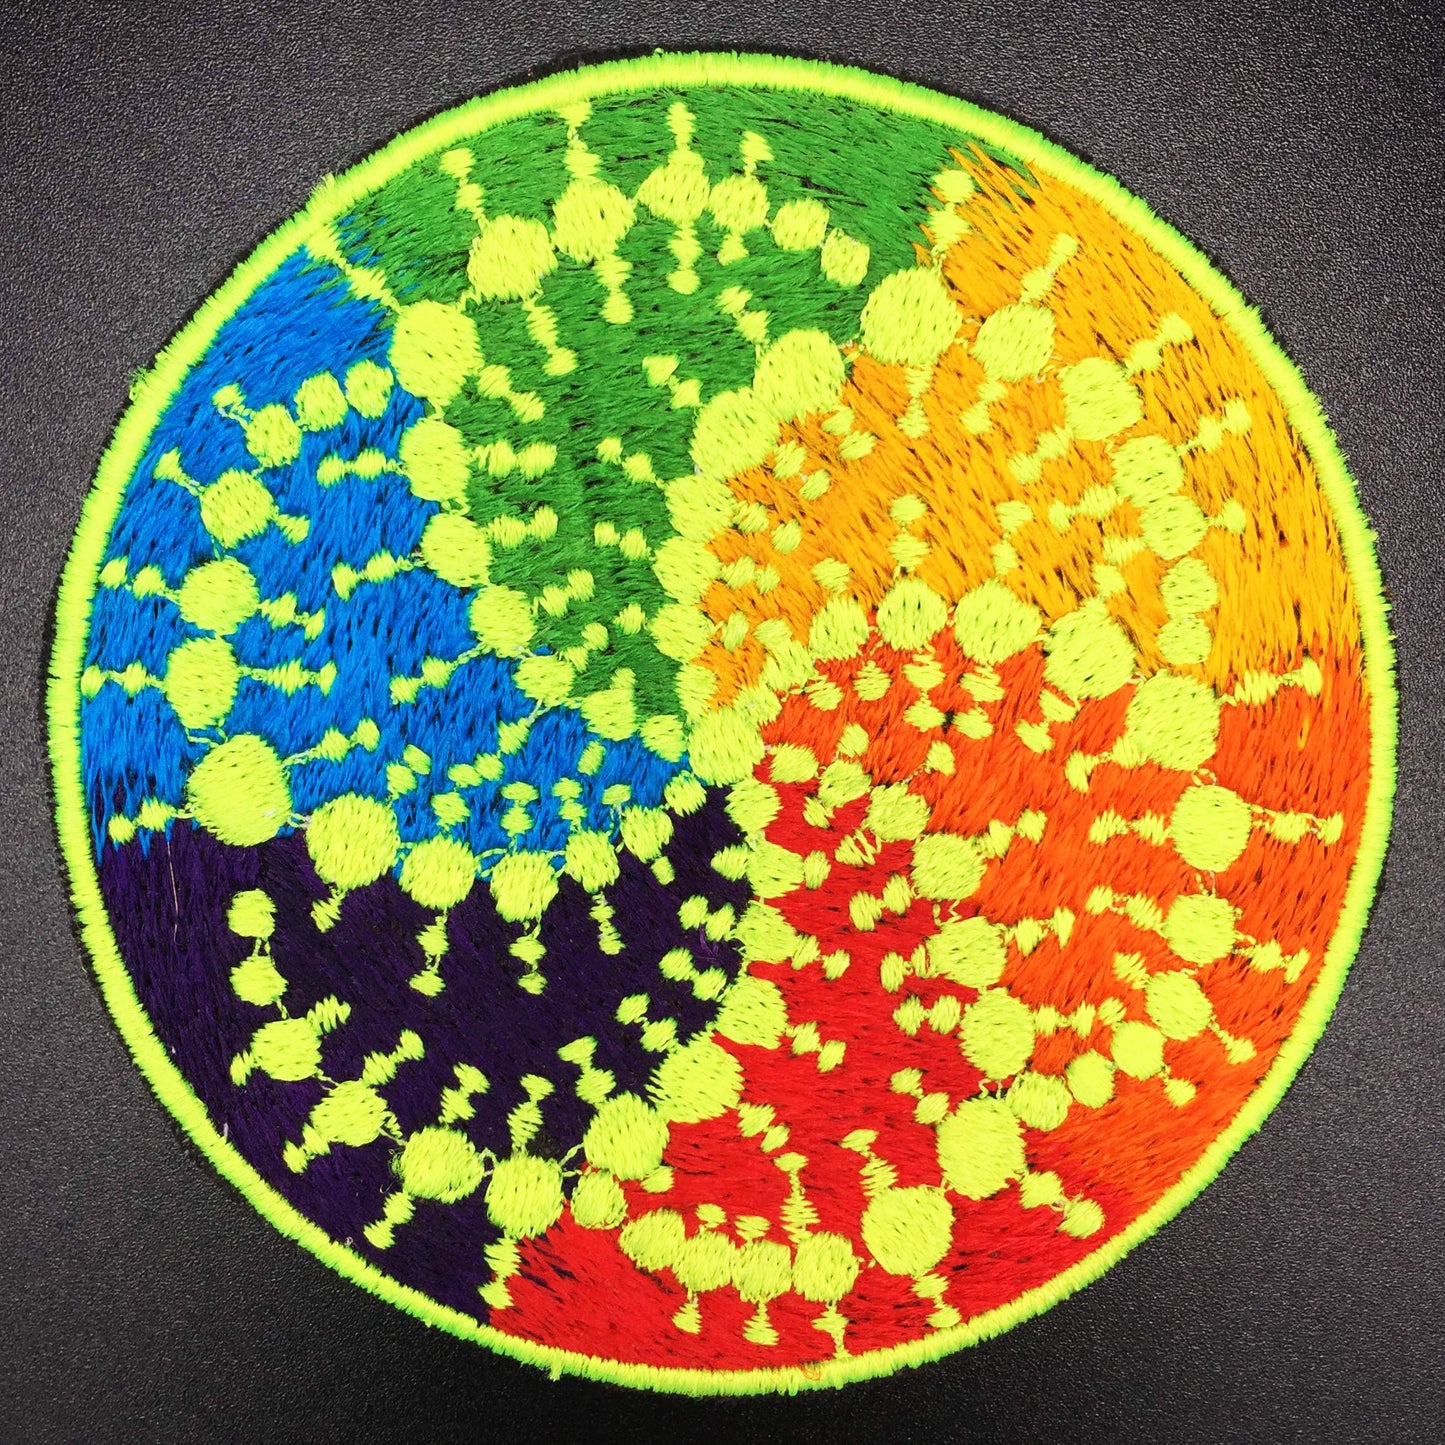 Milk Hill cropcircle embroidery patch for sew on - 3.5 inch - blacklight glowing - sacred geometry - crop circle was with 300 meter diameter